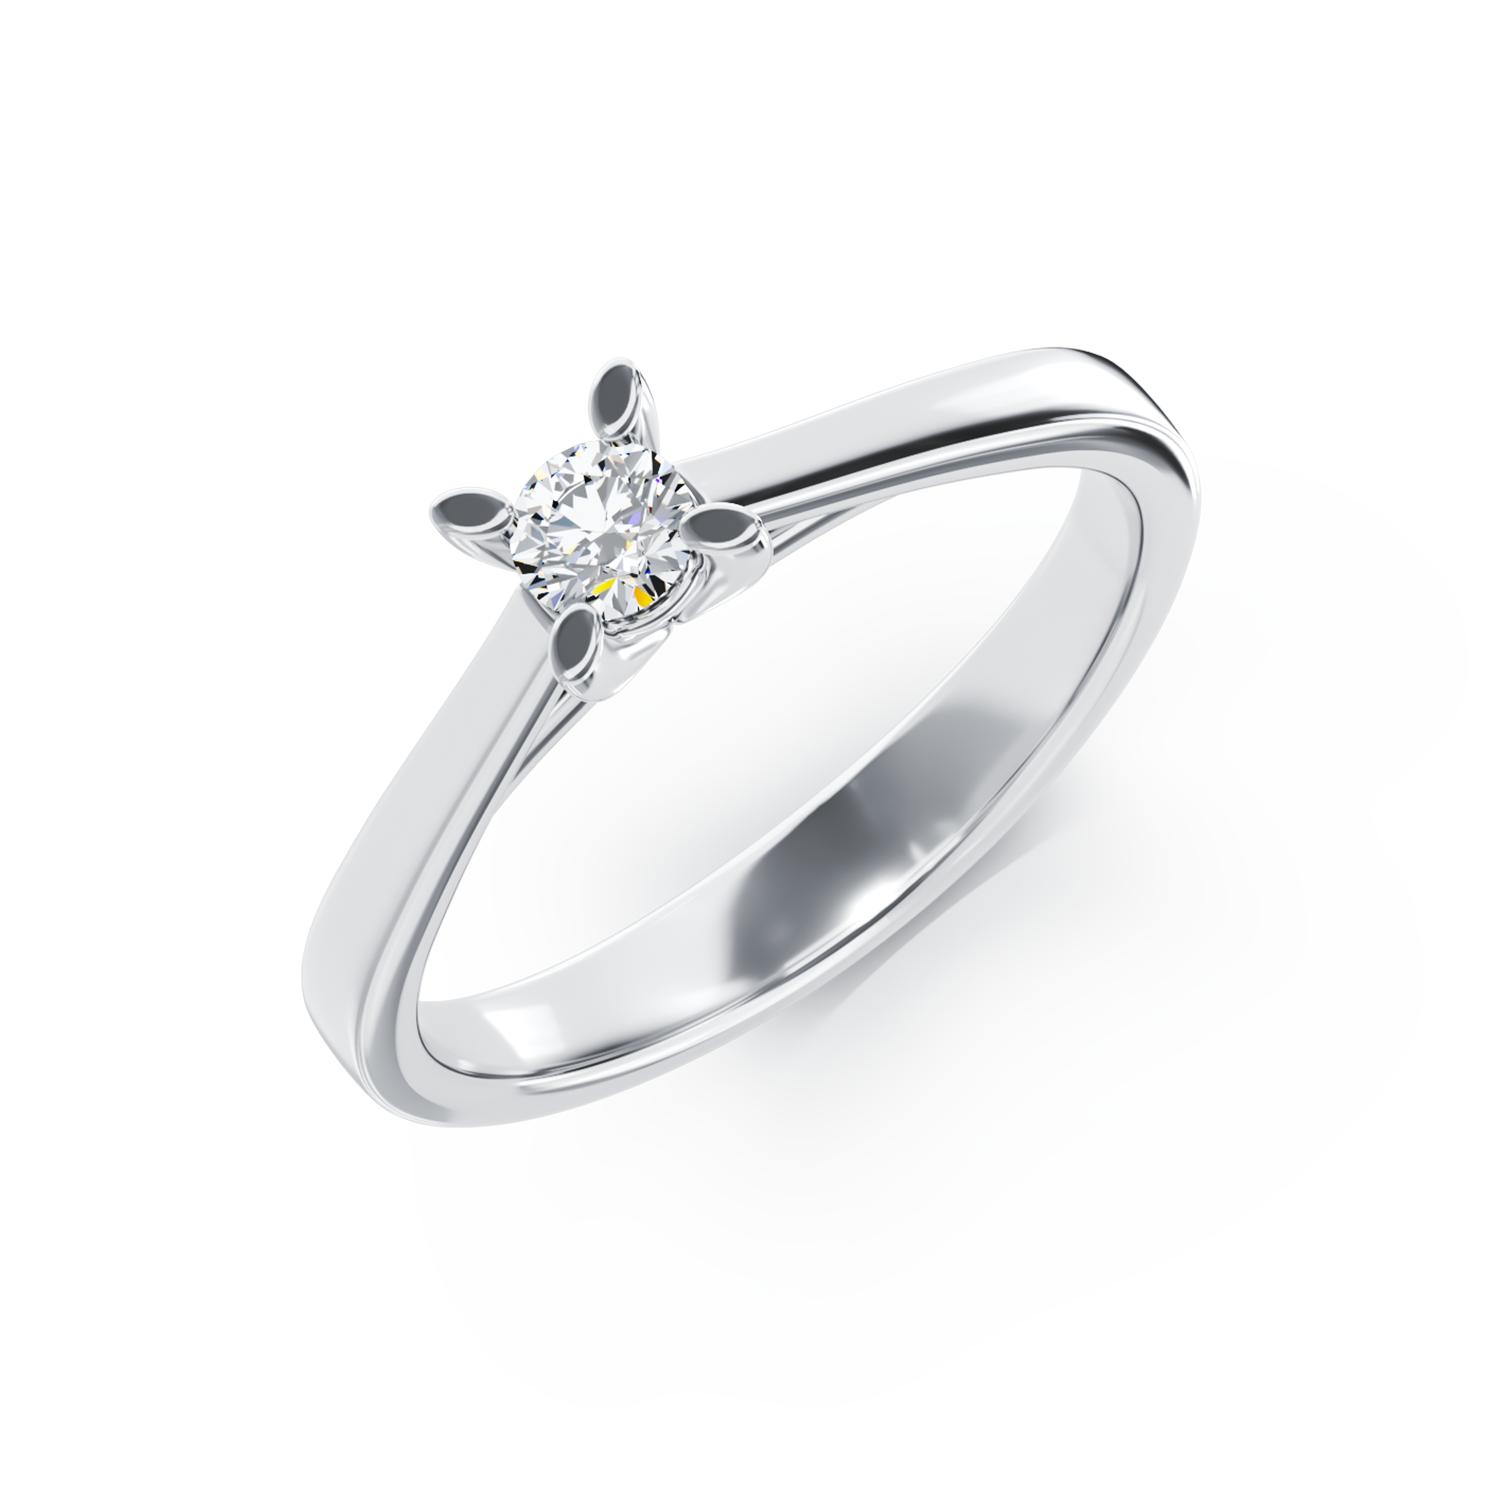 18K white gold engagement ring with a 0.24ct solitaire diamond